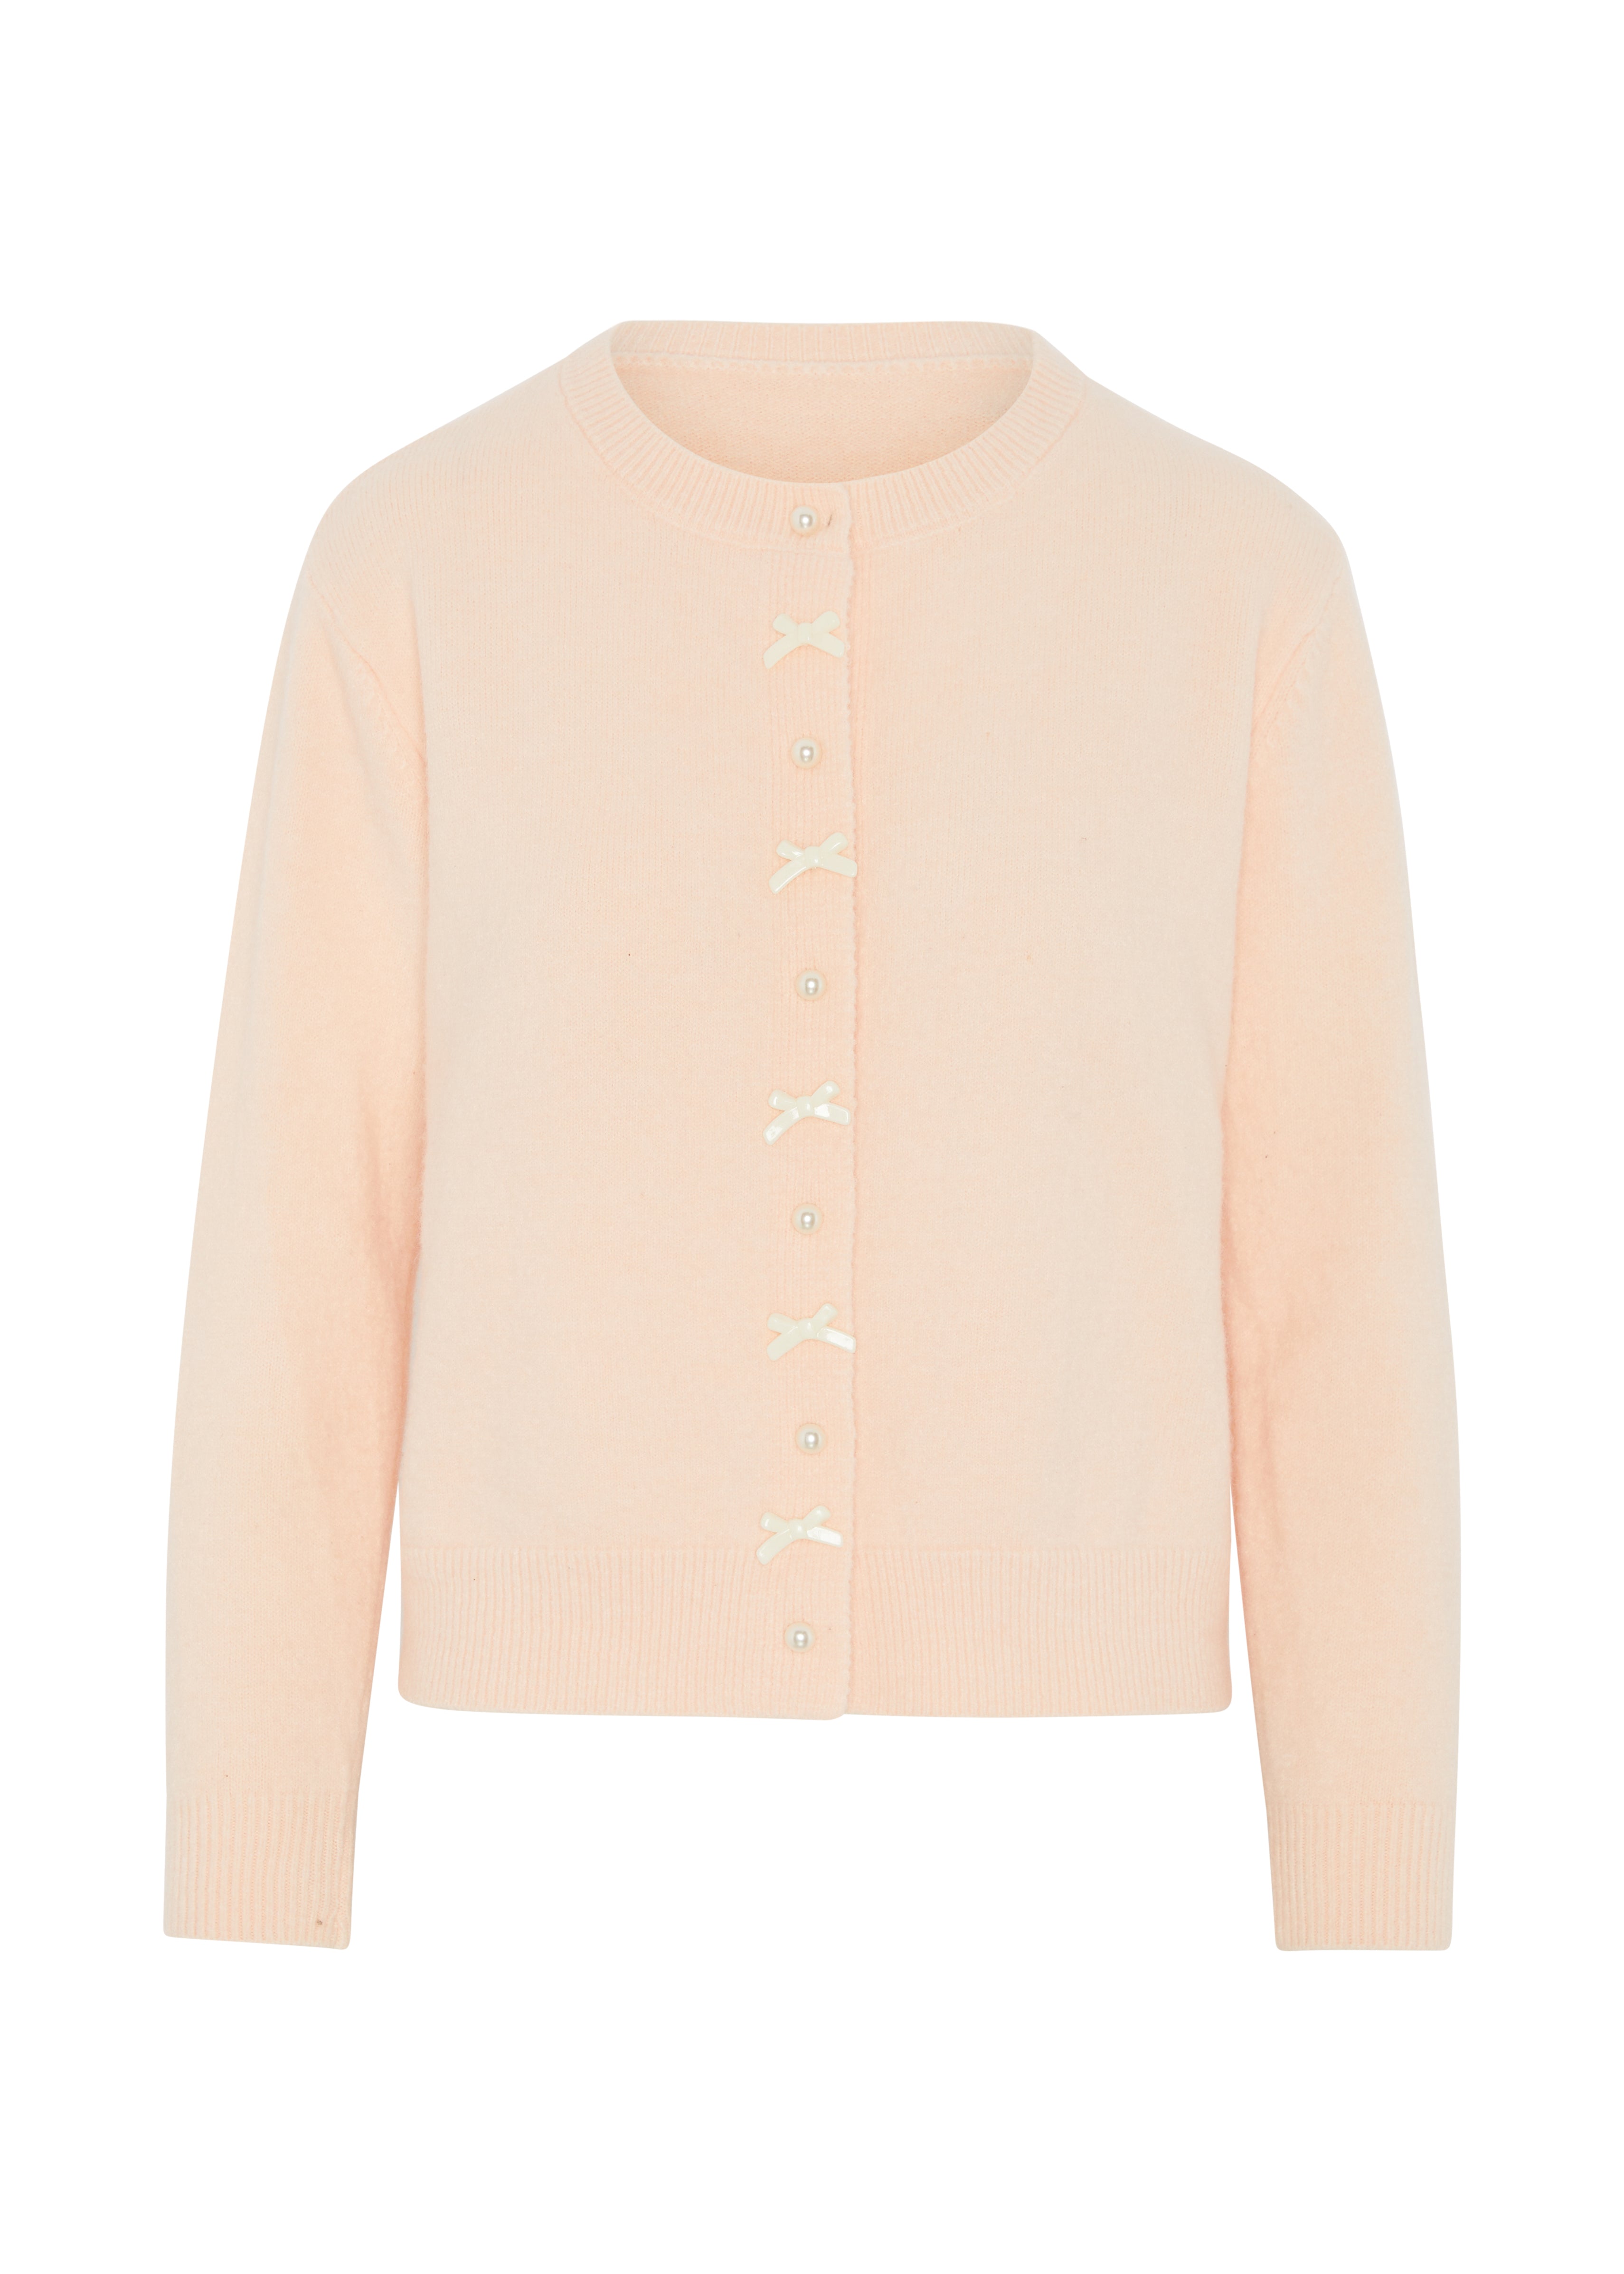 The Bow Knit - Pastel Pink